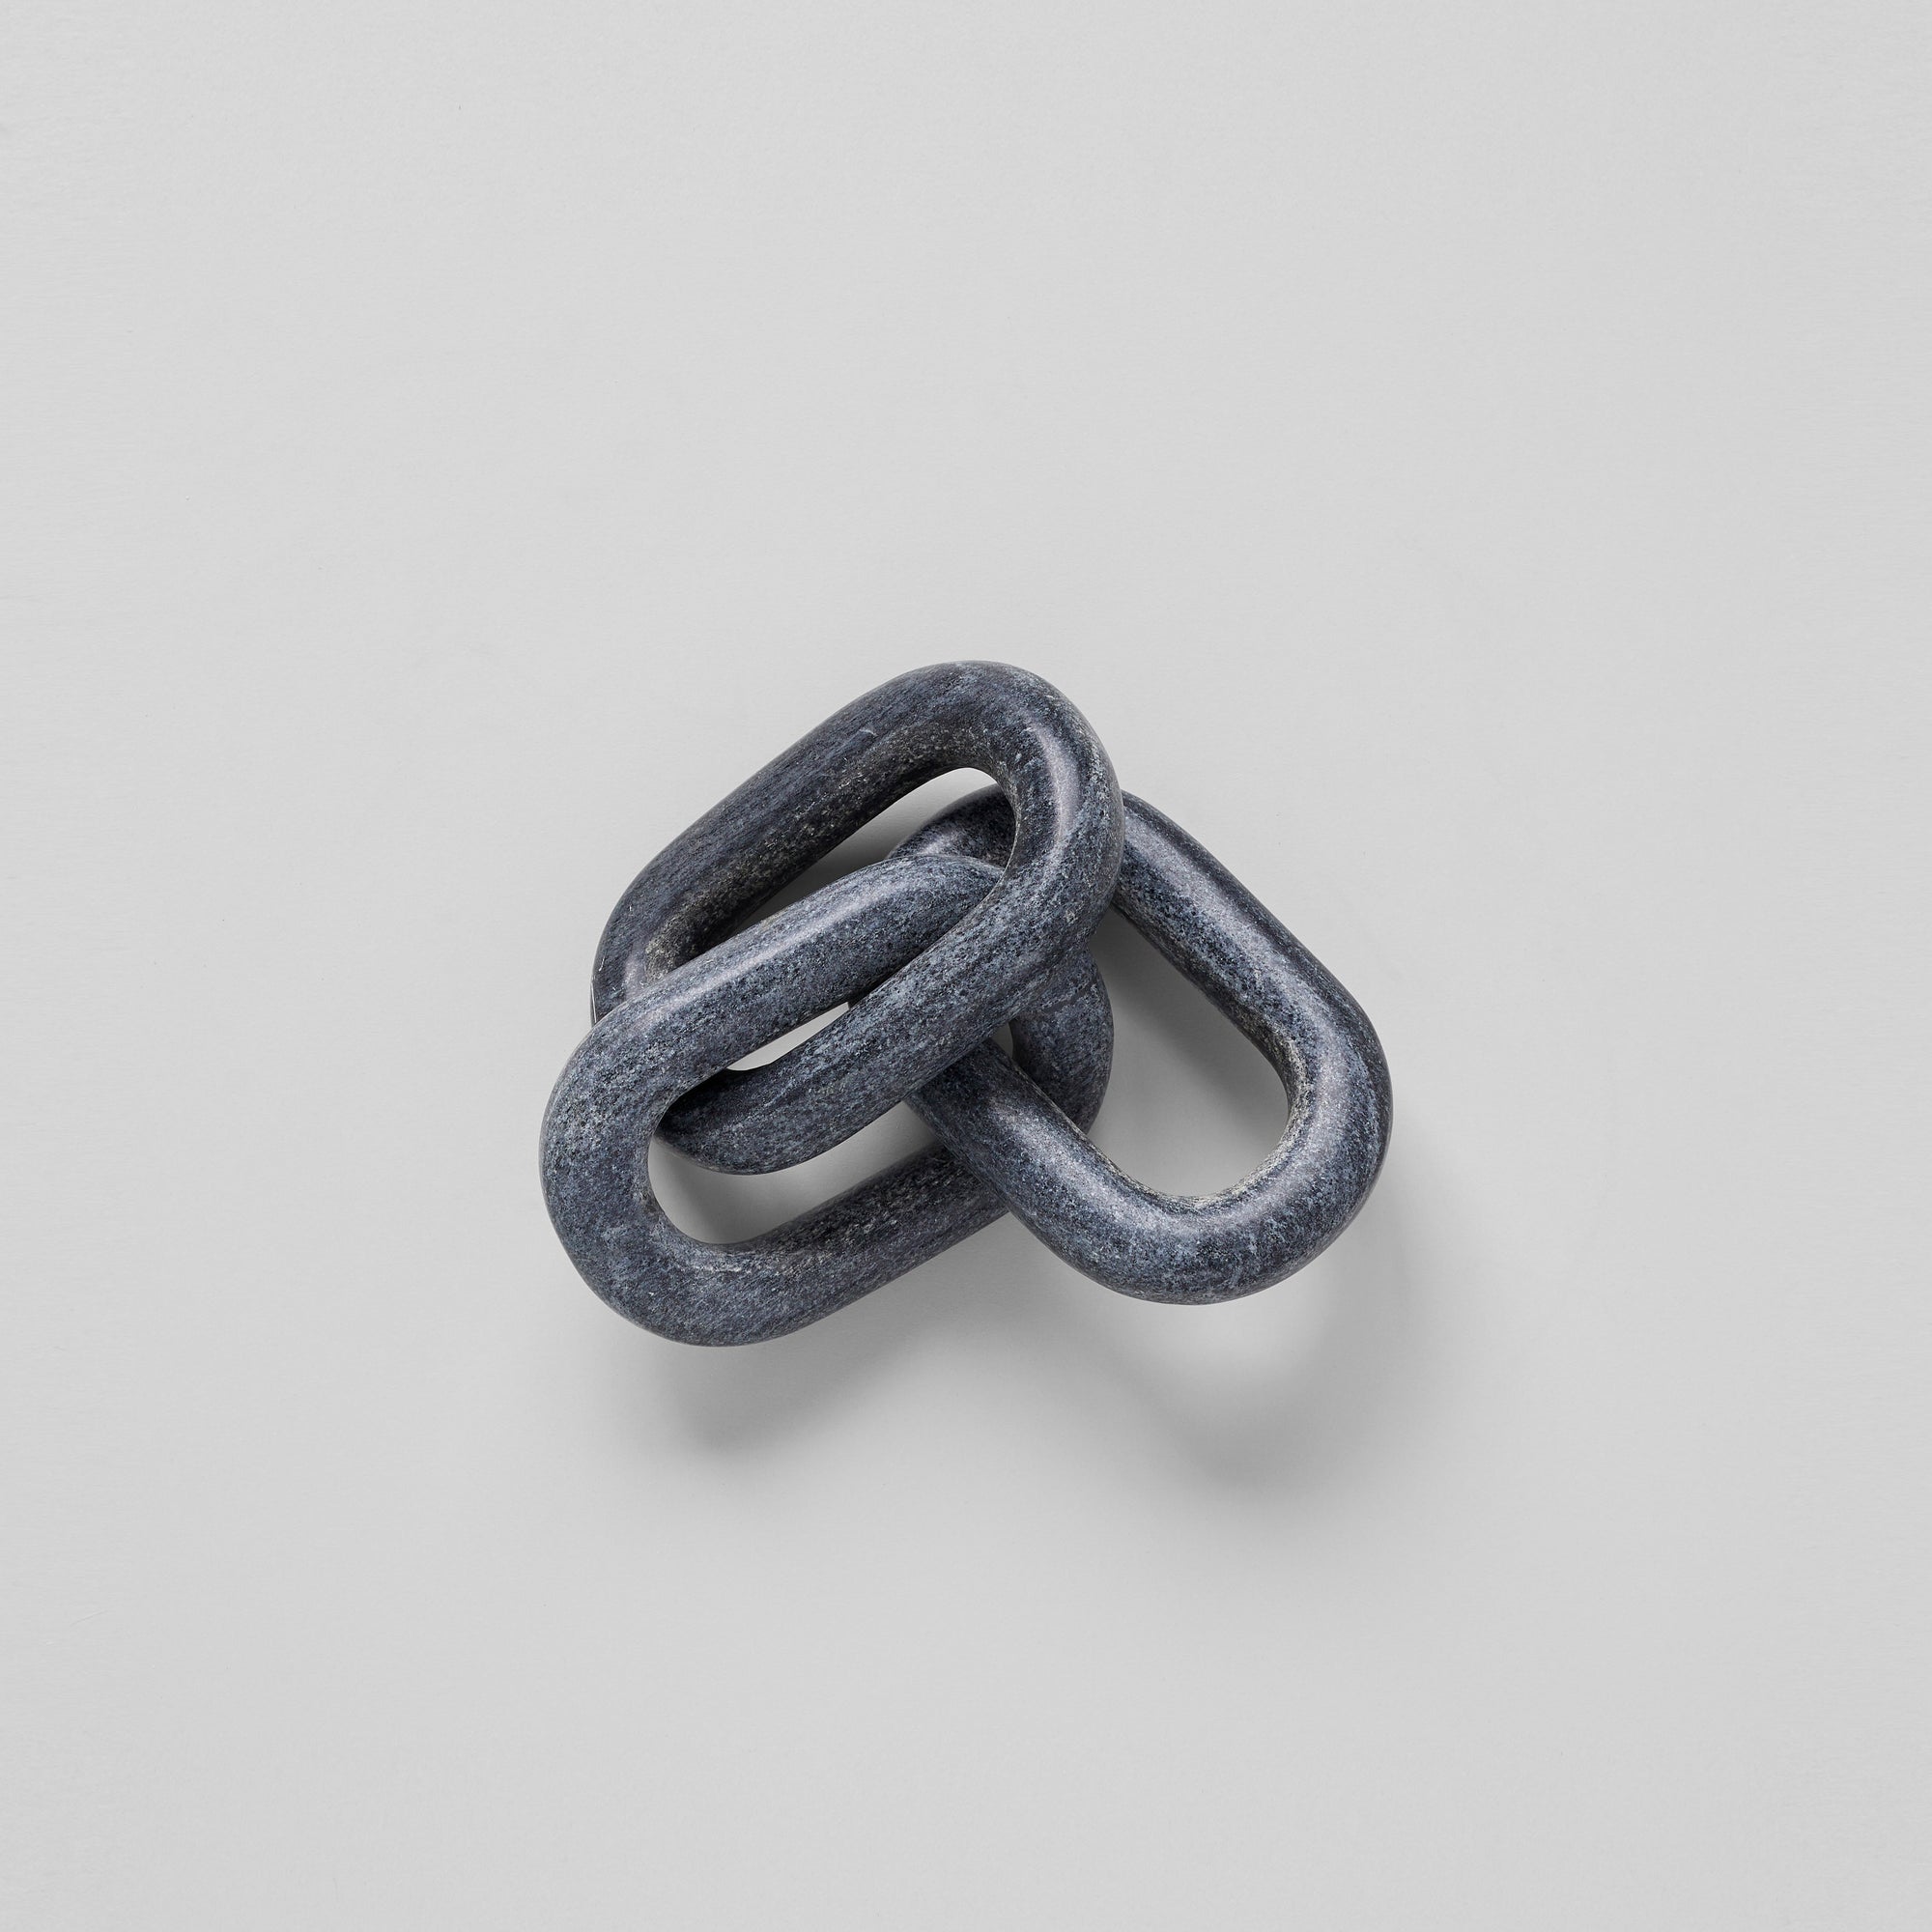 Black Marble Chain, Small Link